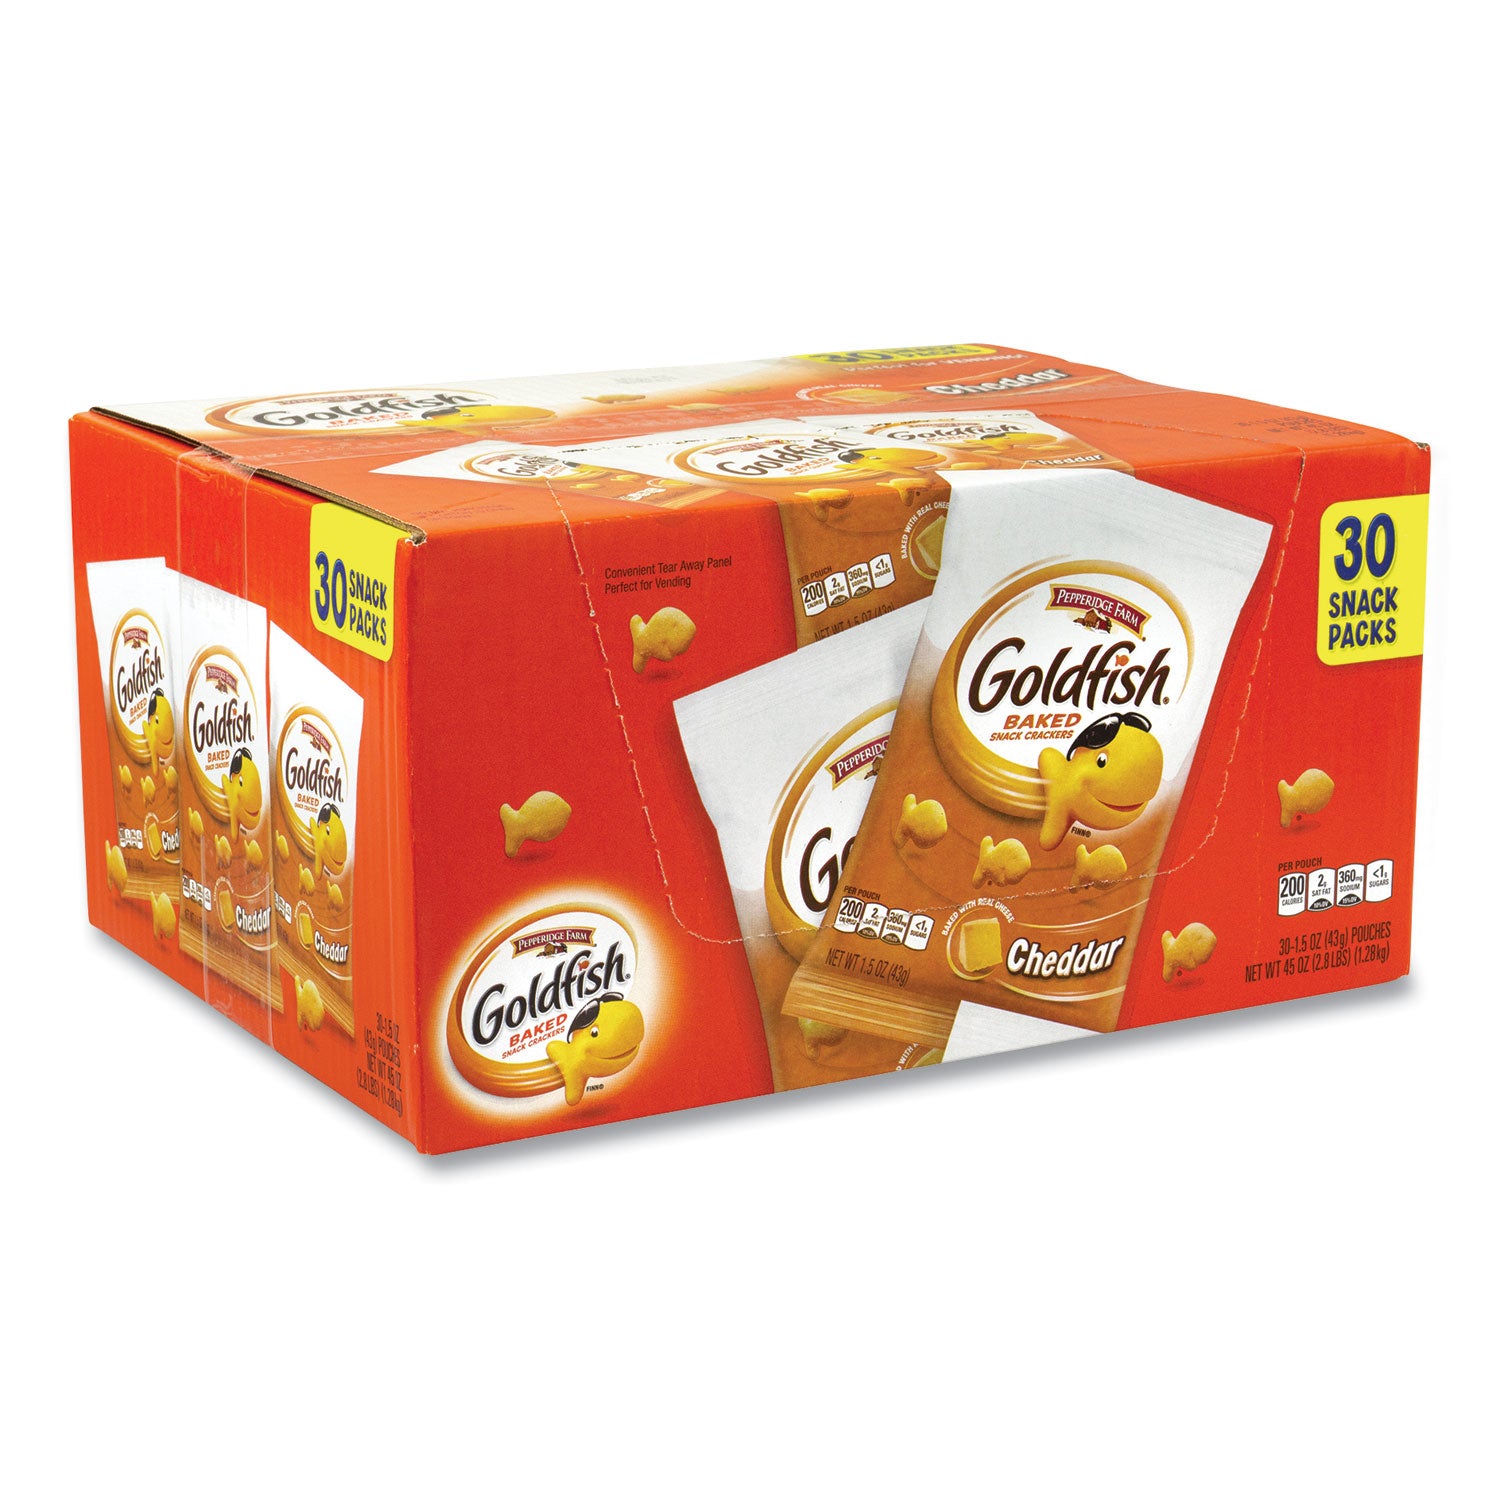 goldfish-crackers-cheddar-15-oz-bag-30-bags-box-ships-in-1-3-business-days_grr22000493 - 2